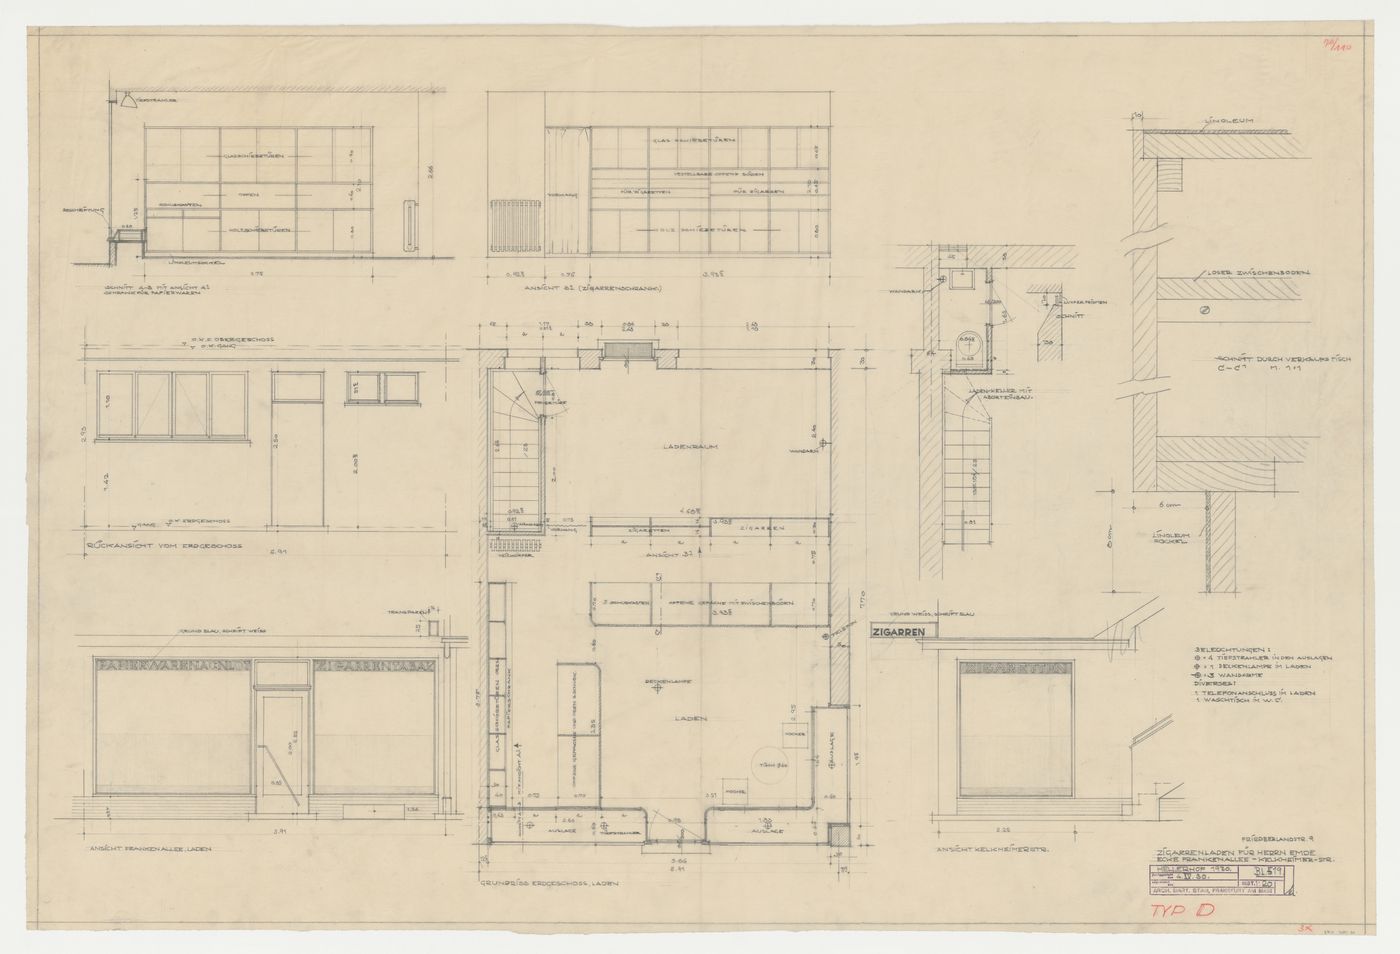 Ground floor plan, partial ground floor plan, elevations, and sections for a type D men's cigar store on the Frankenalle and Kelkheimerstrasse, Hellerhof Housing Estate, Frankfurt am Main, Germany